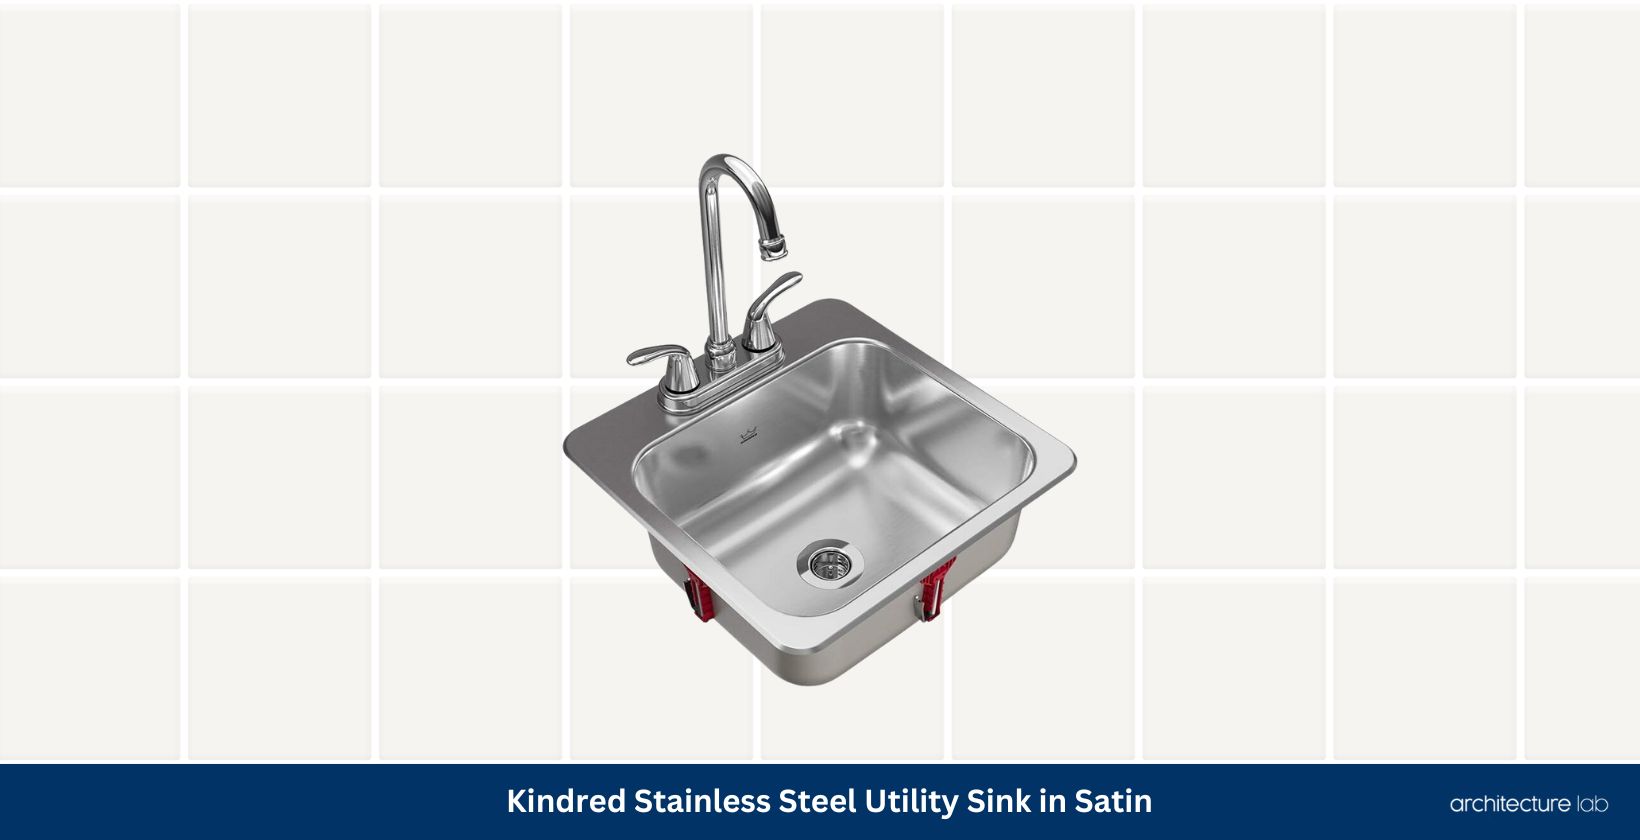 Kindred stainless steel